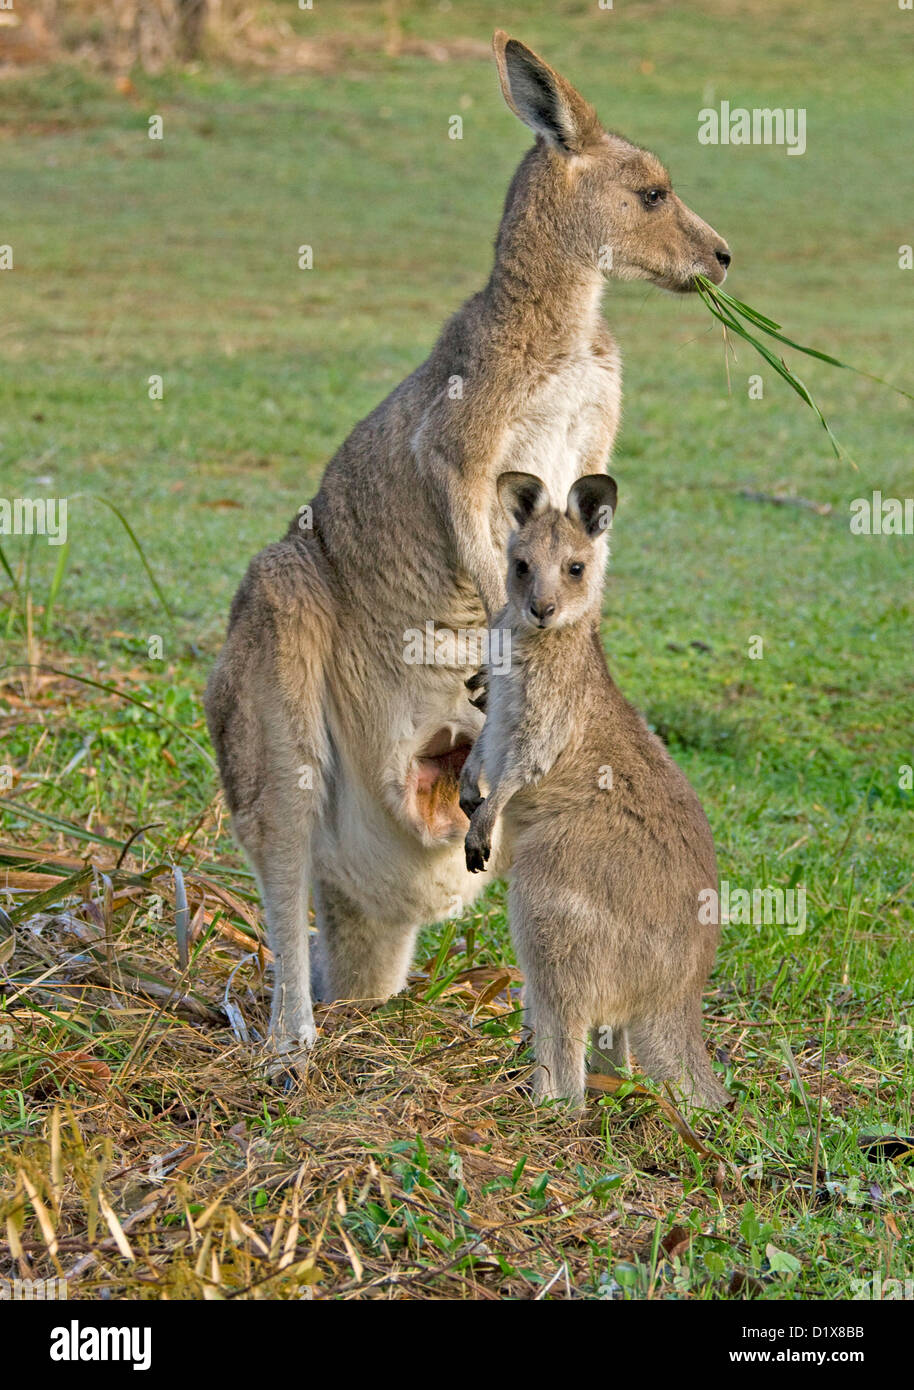 Joey kangaroo Macropus giganteus standing beside mother eating grass with pouch wide open to show red interior and teat - shot in the wild Stock Photo